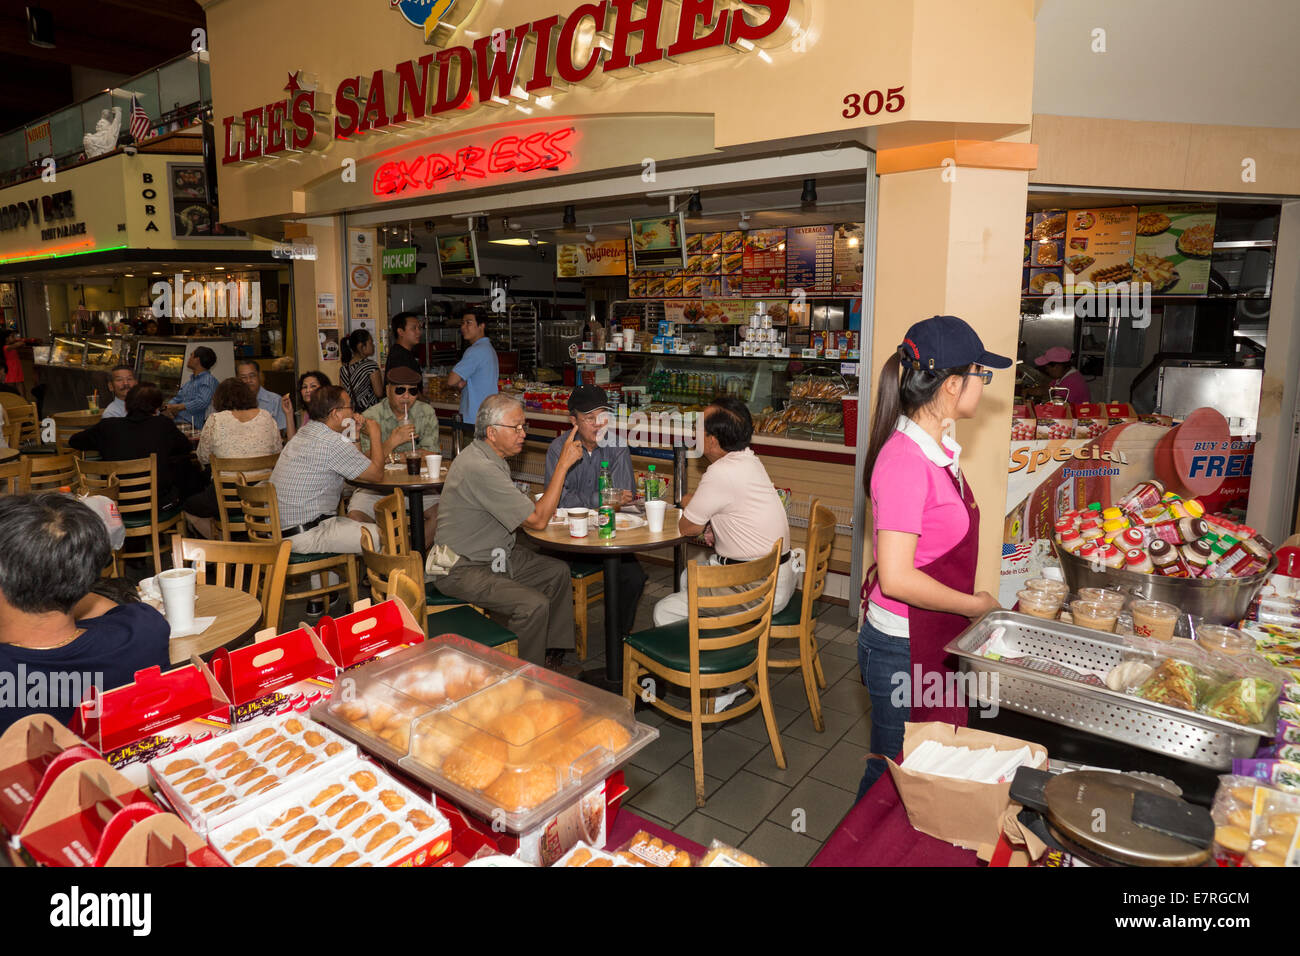 Sandwiches, Lees food court, Asian Garden Mall, City of westminster, Orange County, Californie Banque D'Images